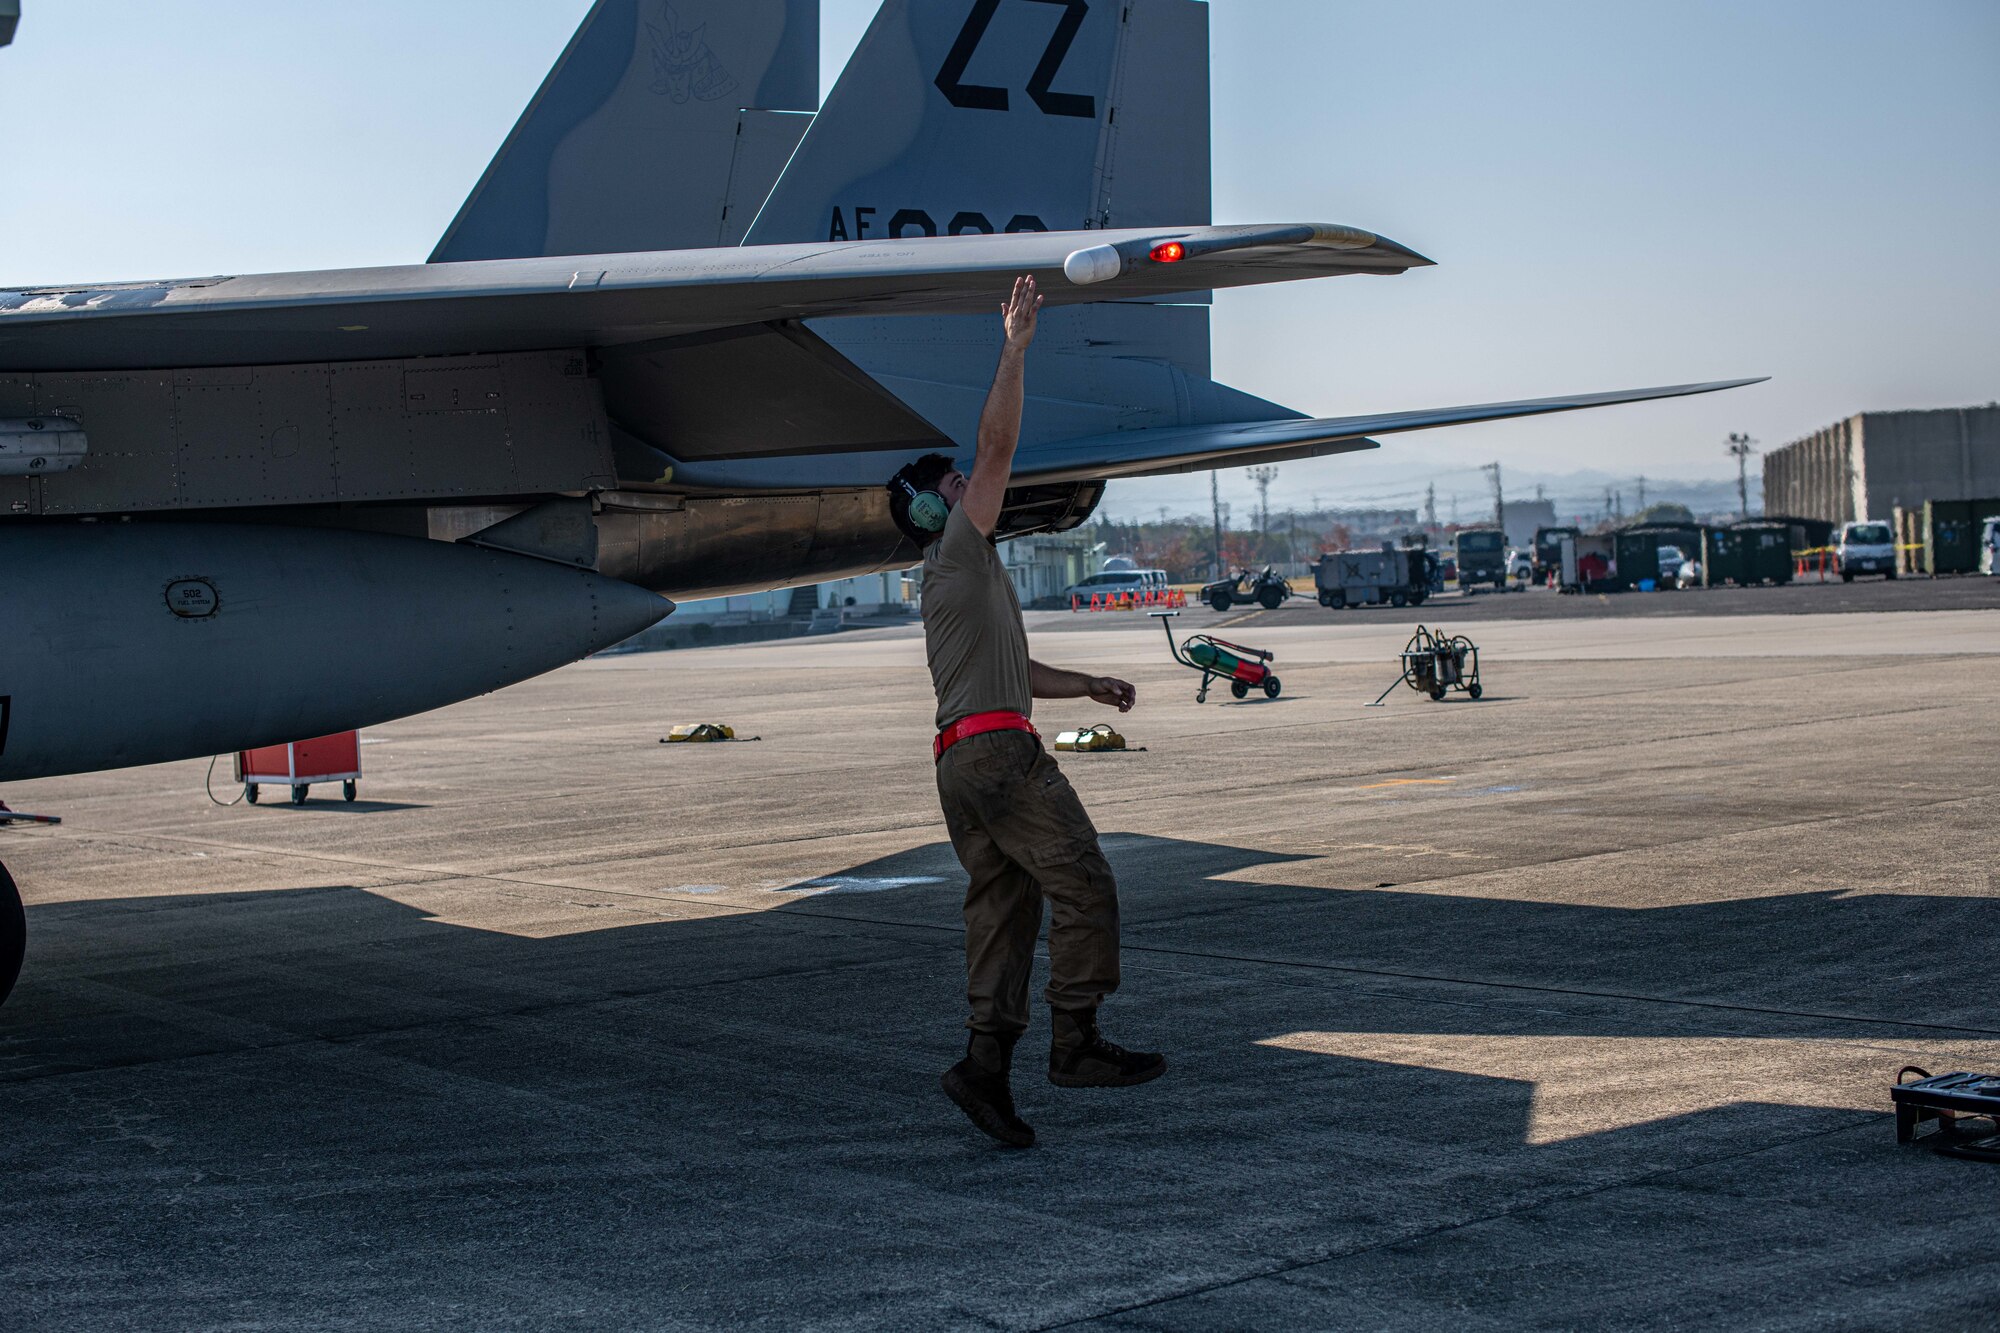 Airman taps the wing of a jet.